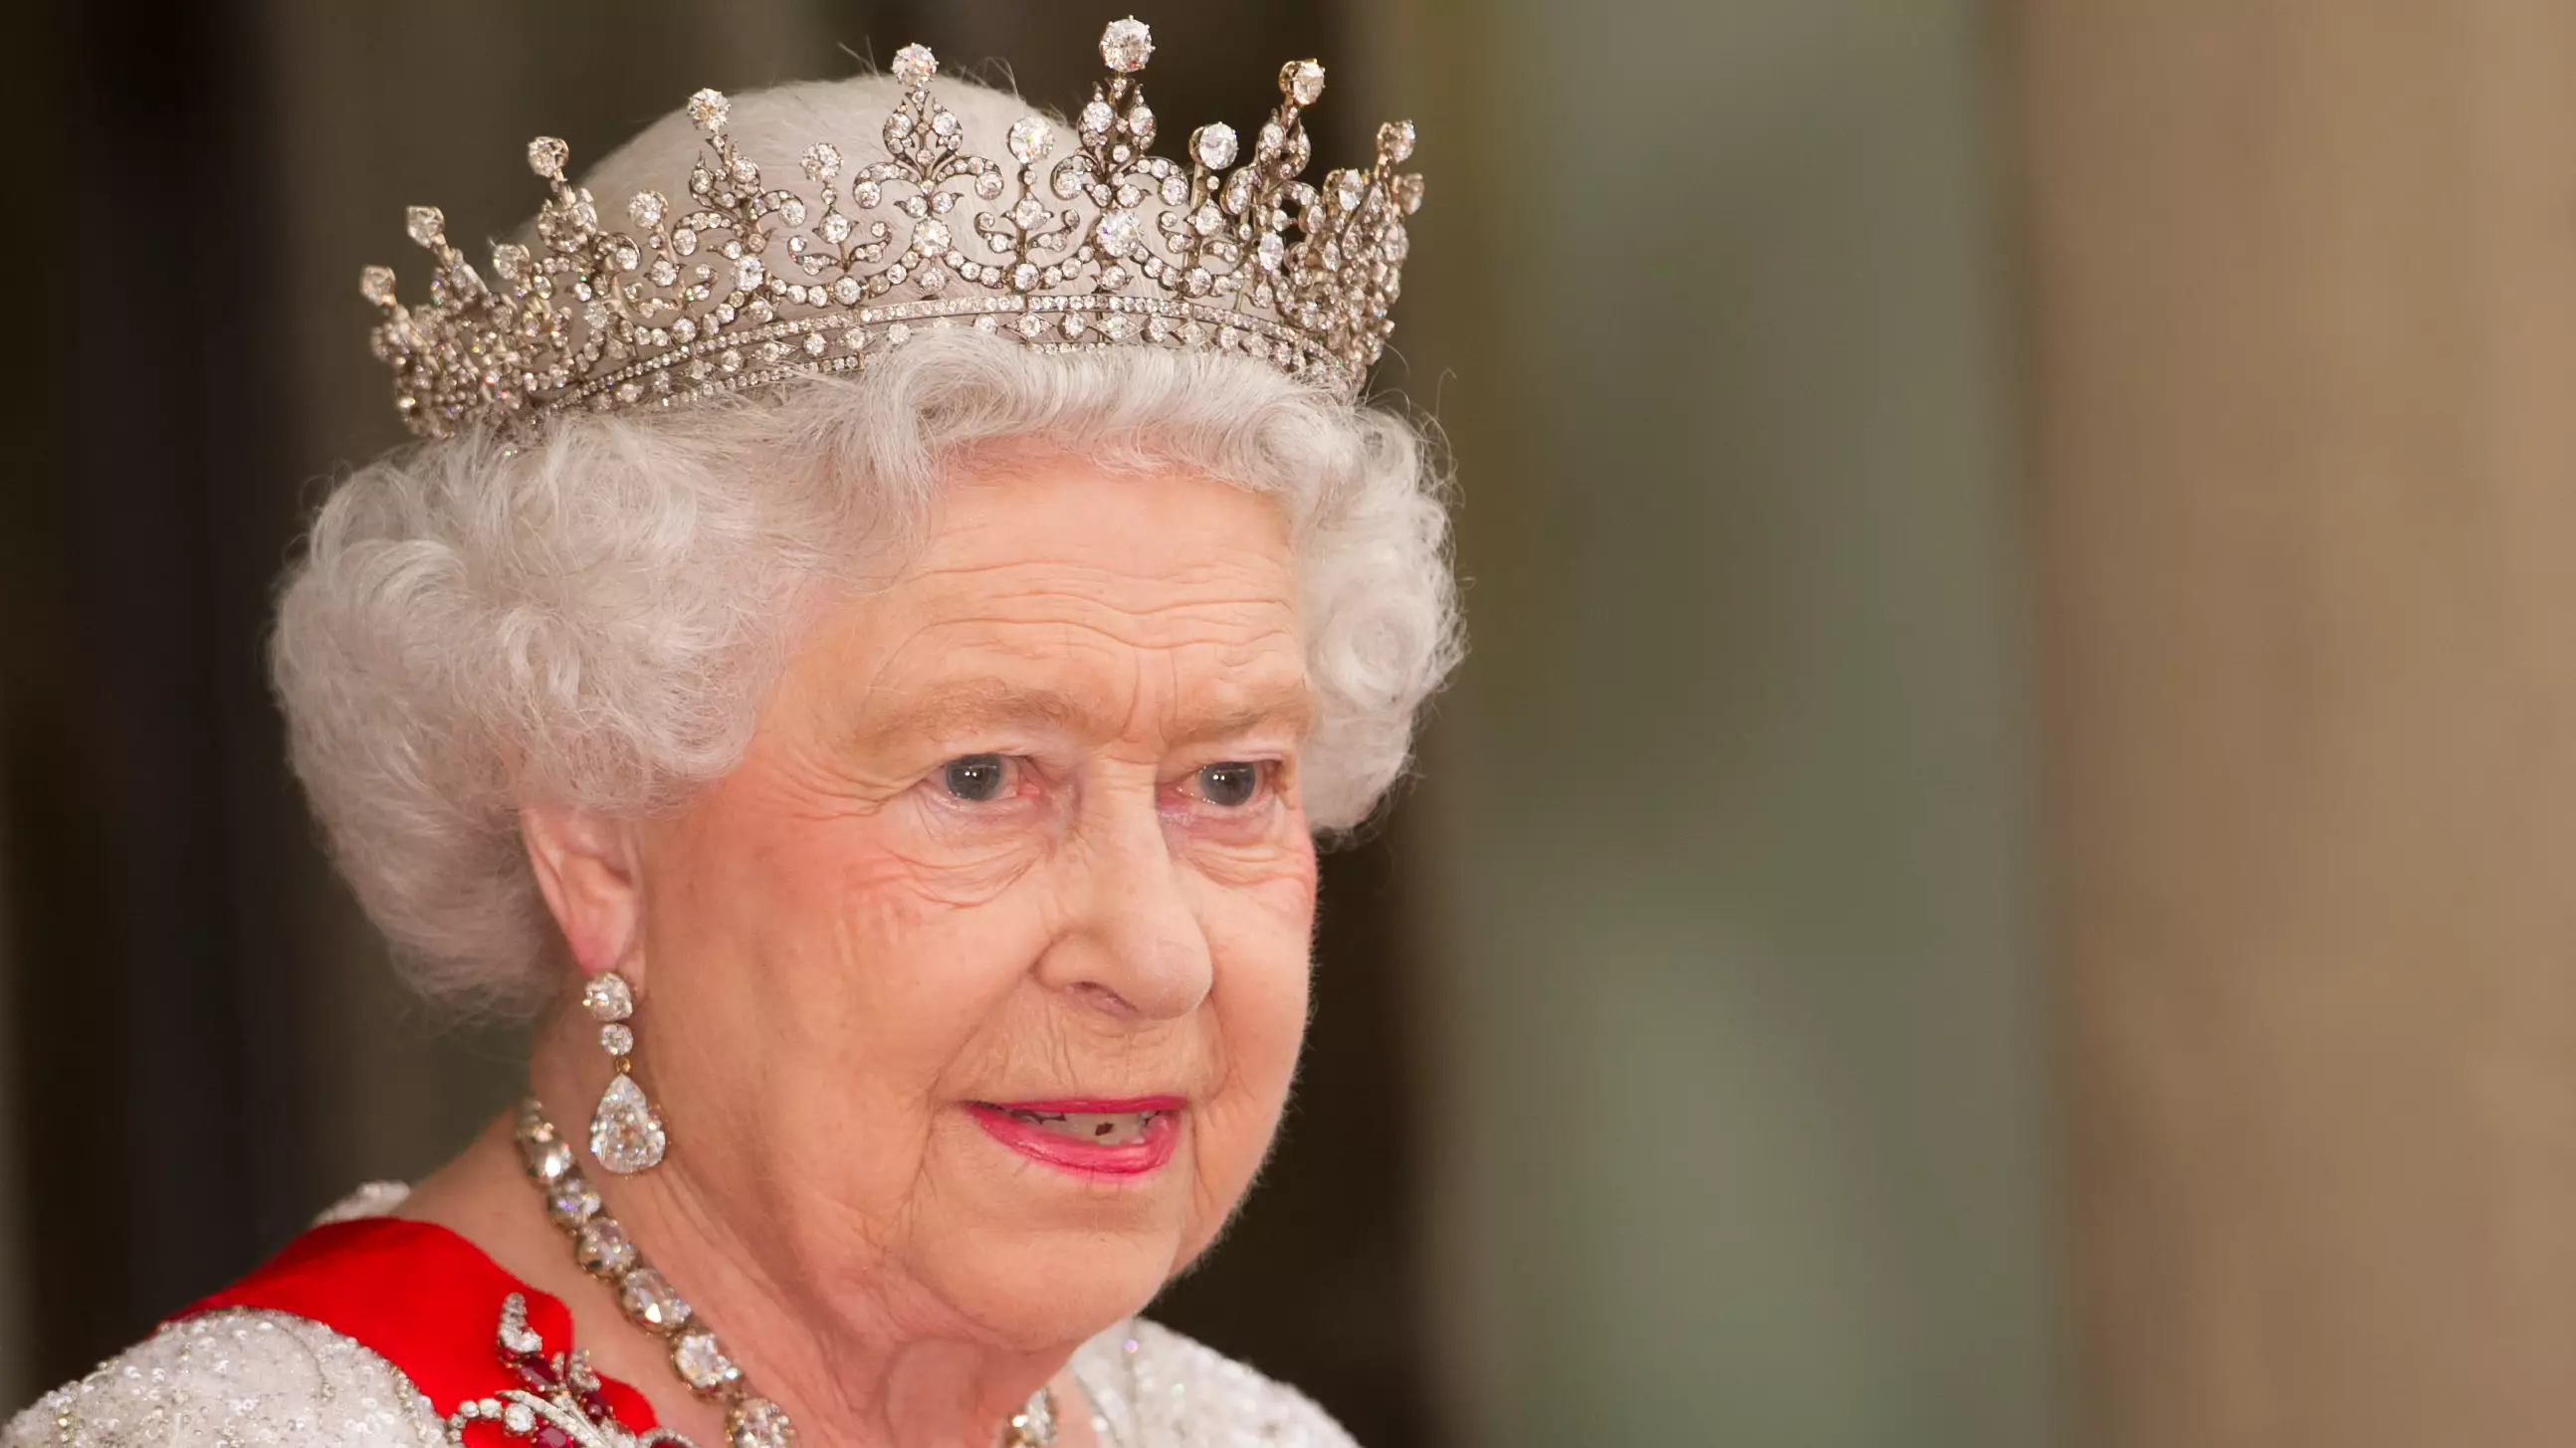 The Queen Launches Gin Made On Sandringham Estate